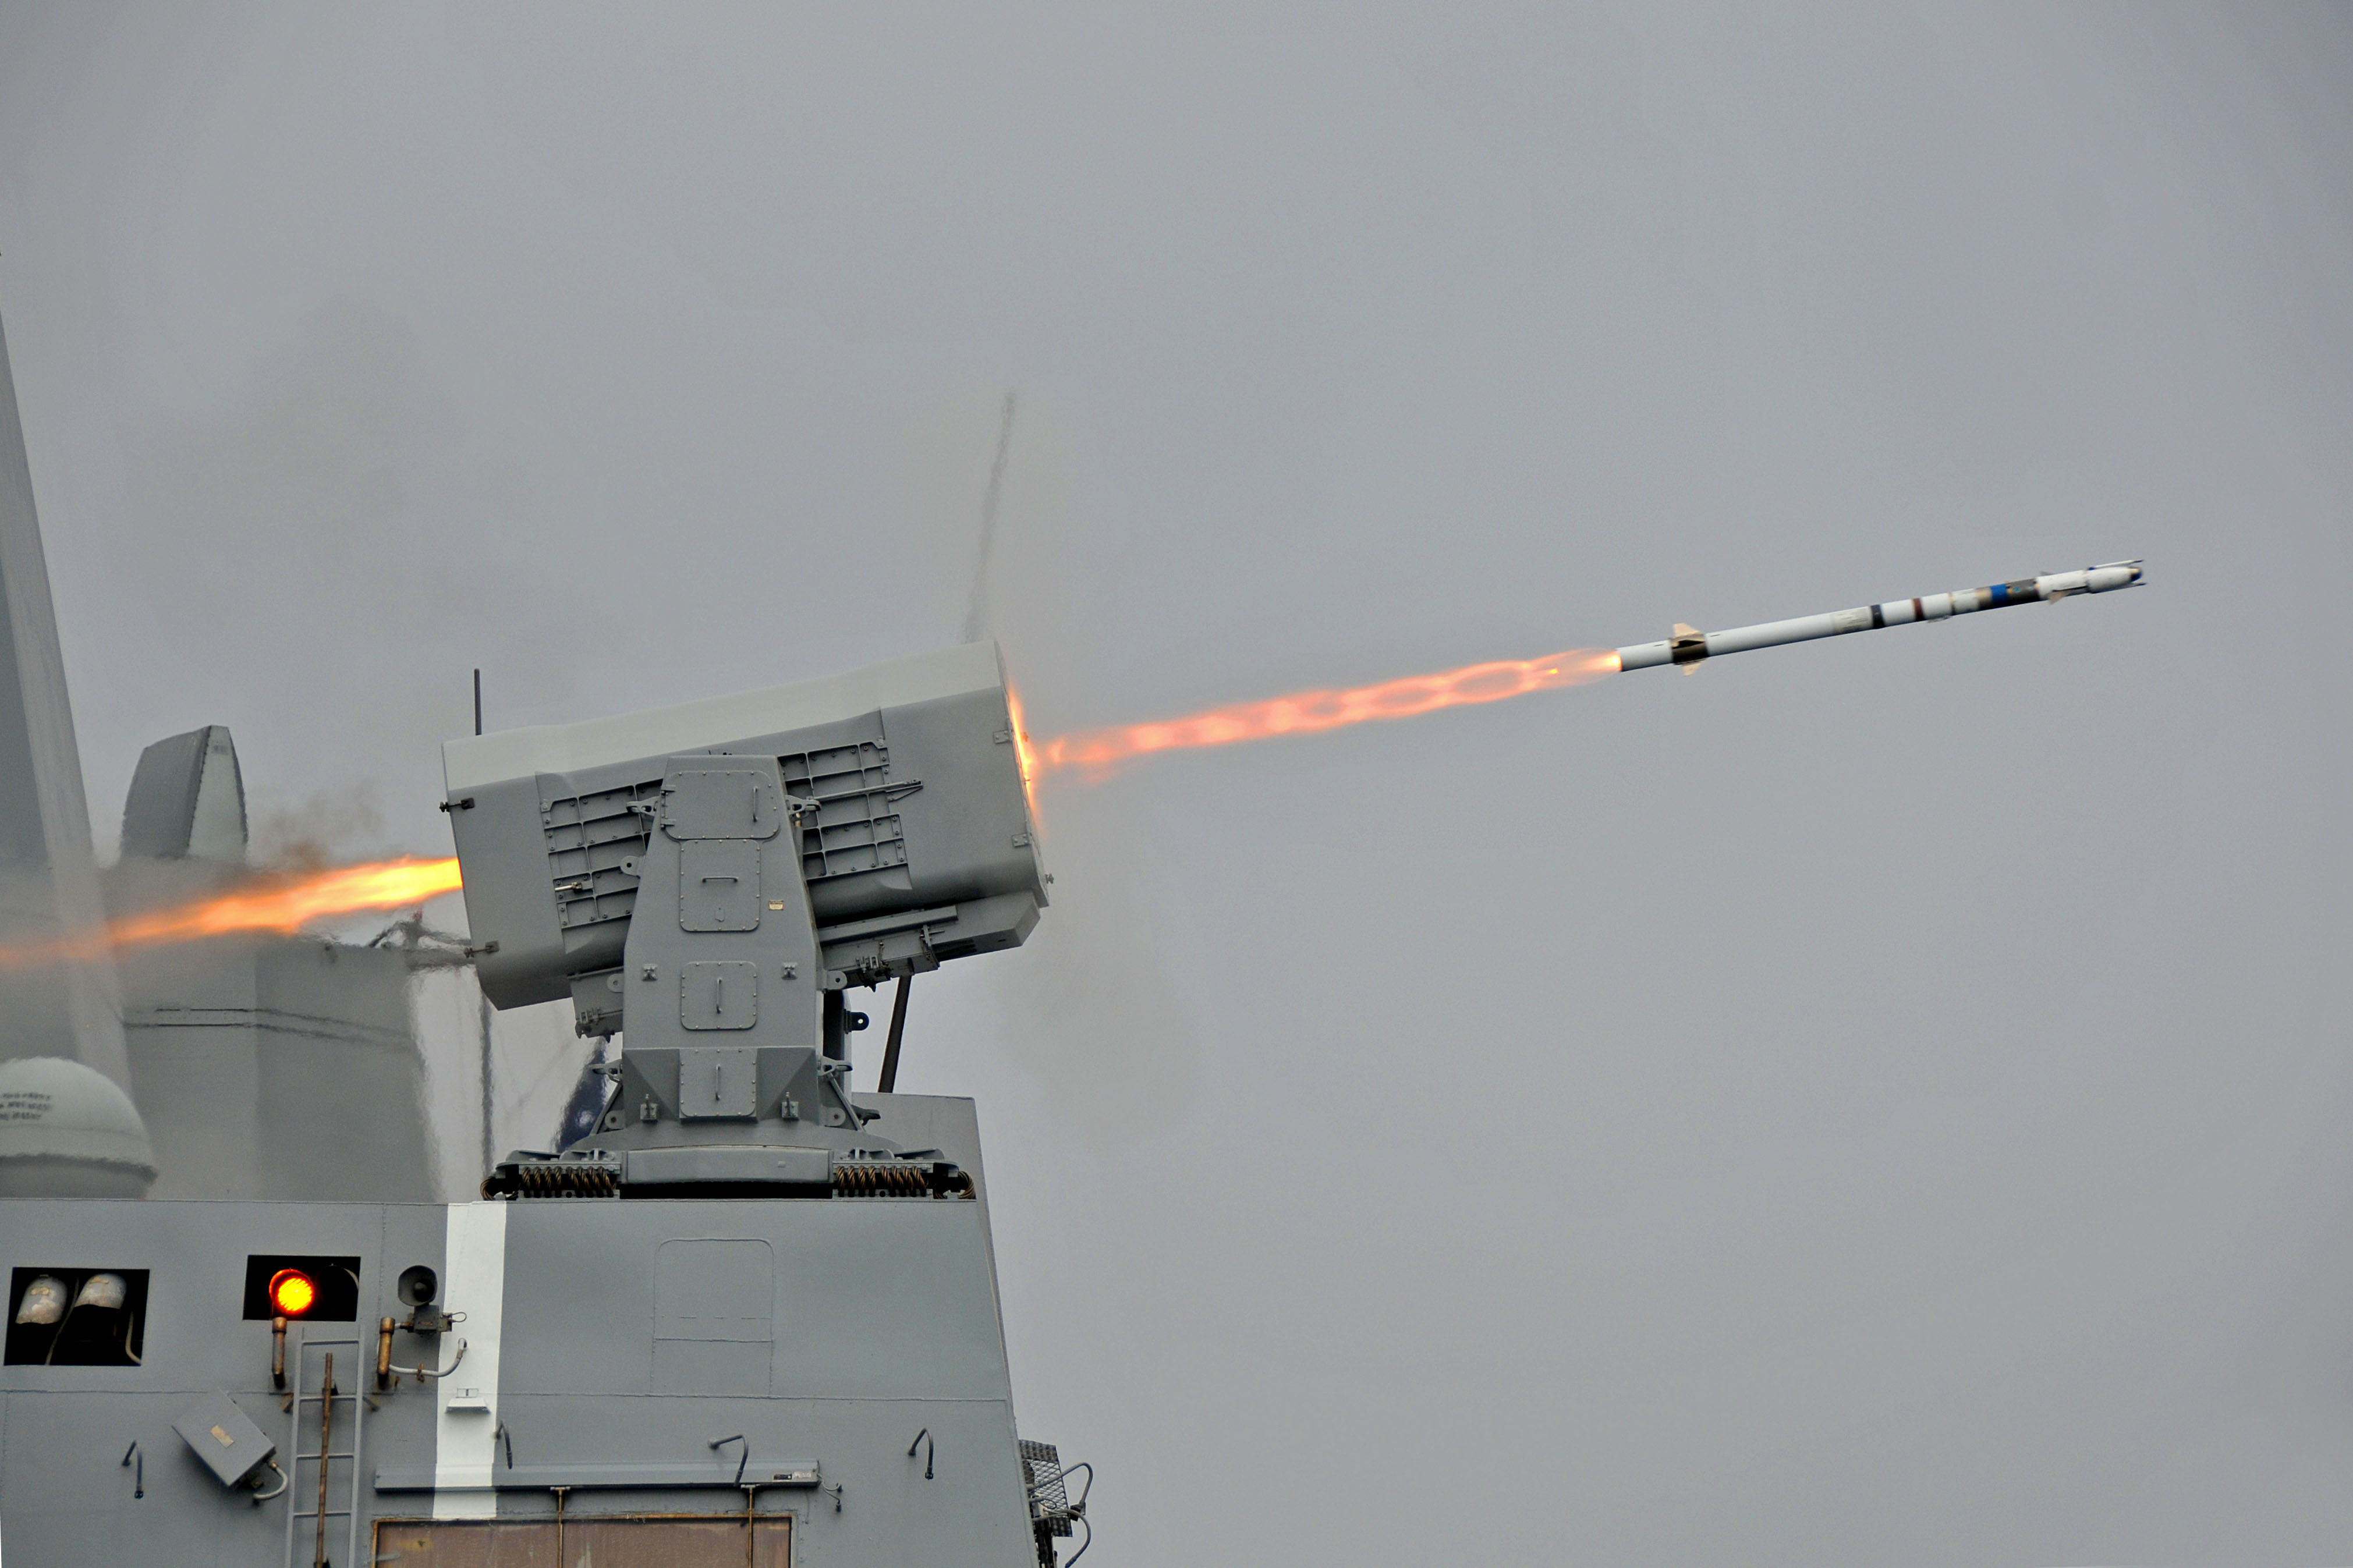 USS_New_Orleans_(LPD-18)_launches_RIM-116_missile_2013.jpg